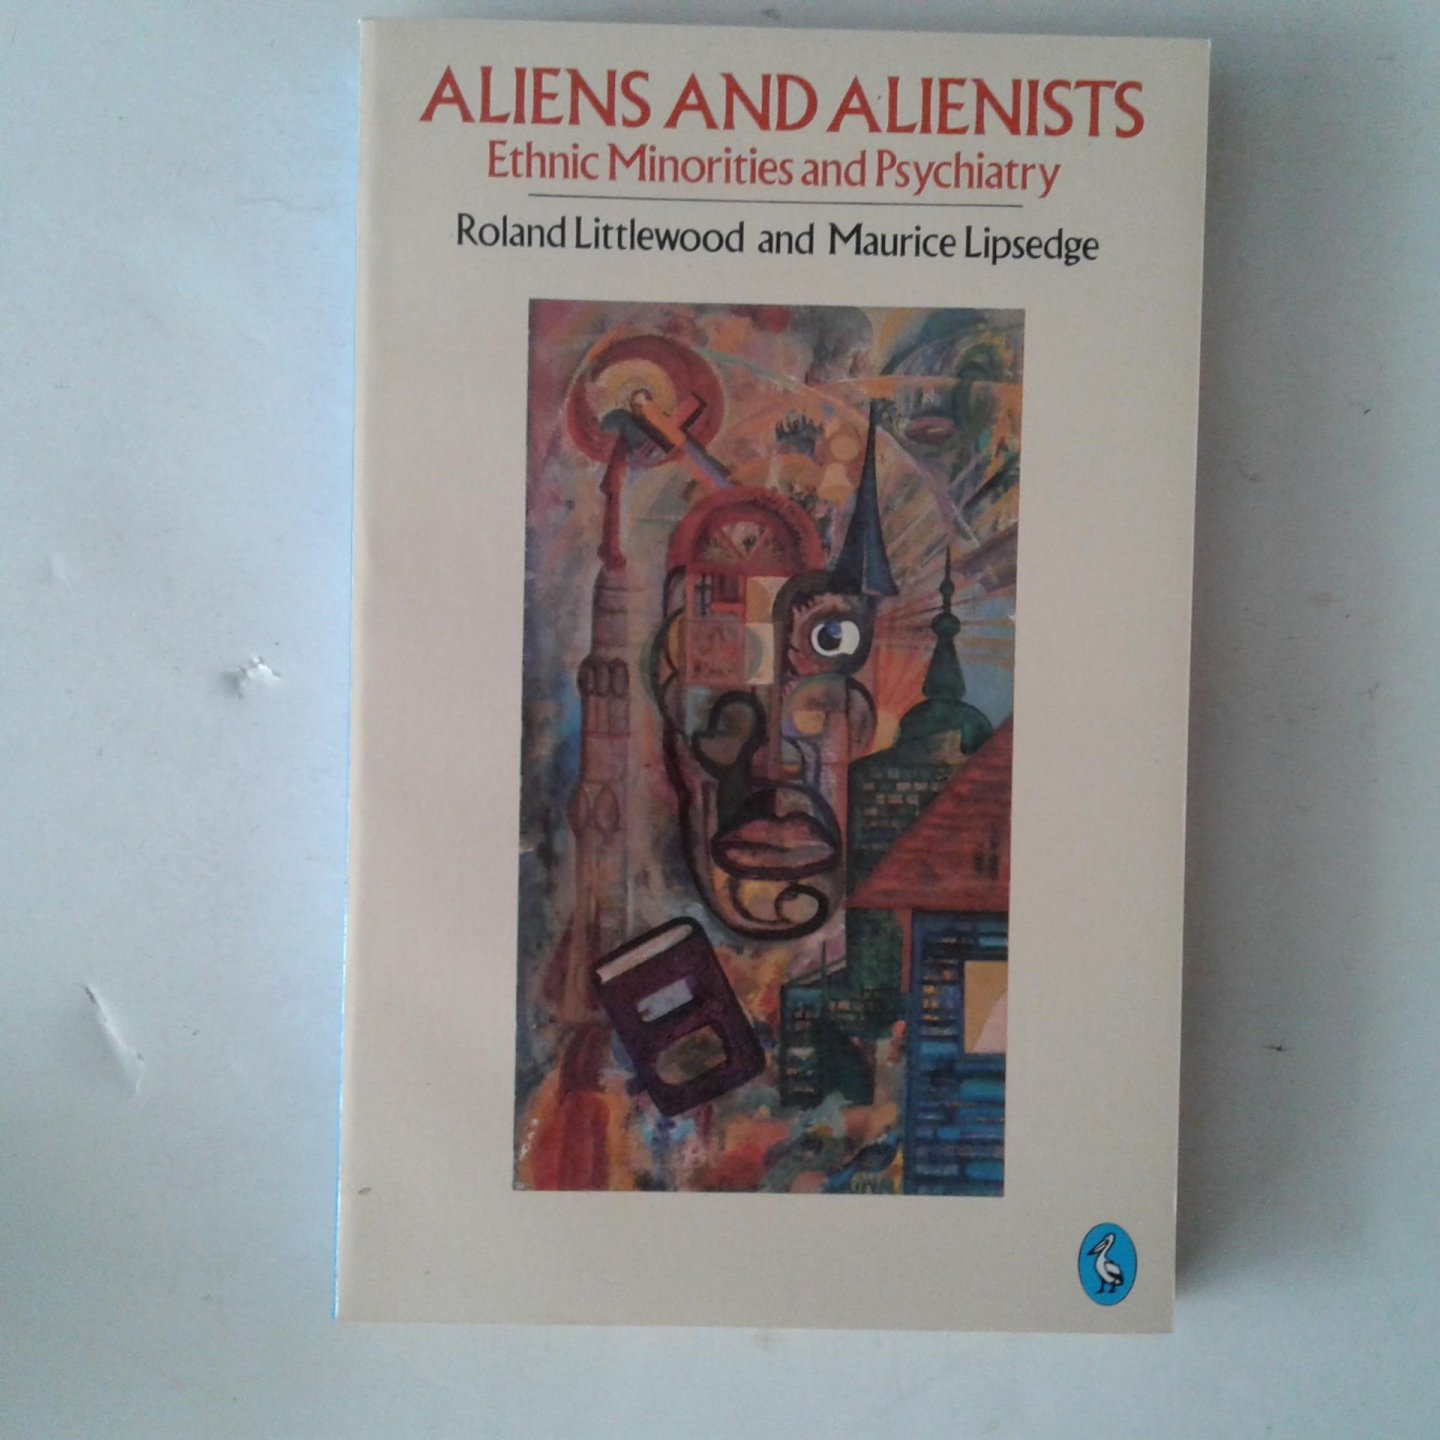 Littlewood, Roland ; Lipsedge, Maurice - Aliens and Alienists ; Etnic Minorities and Psychiatry